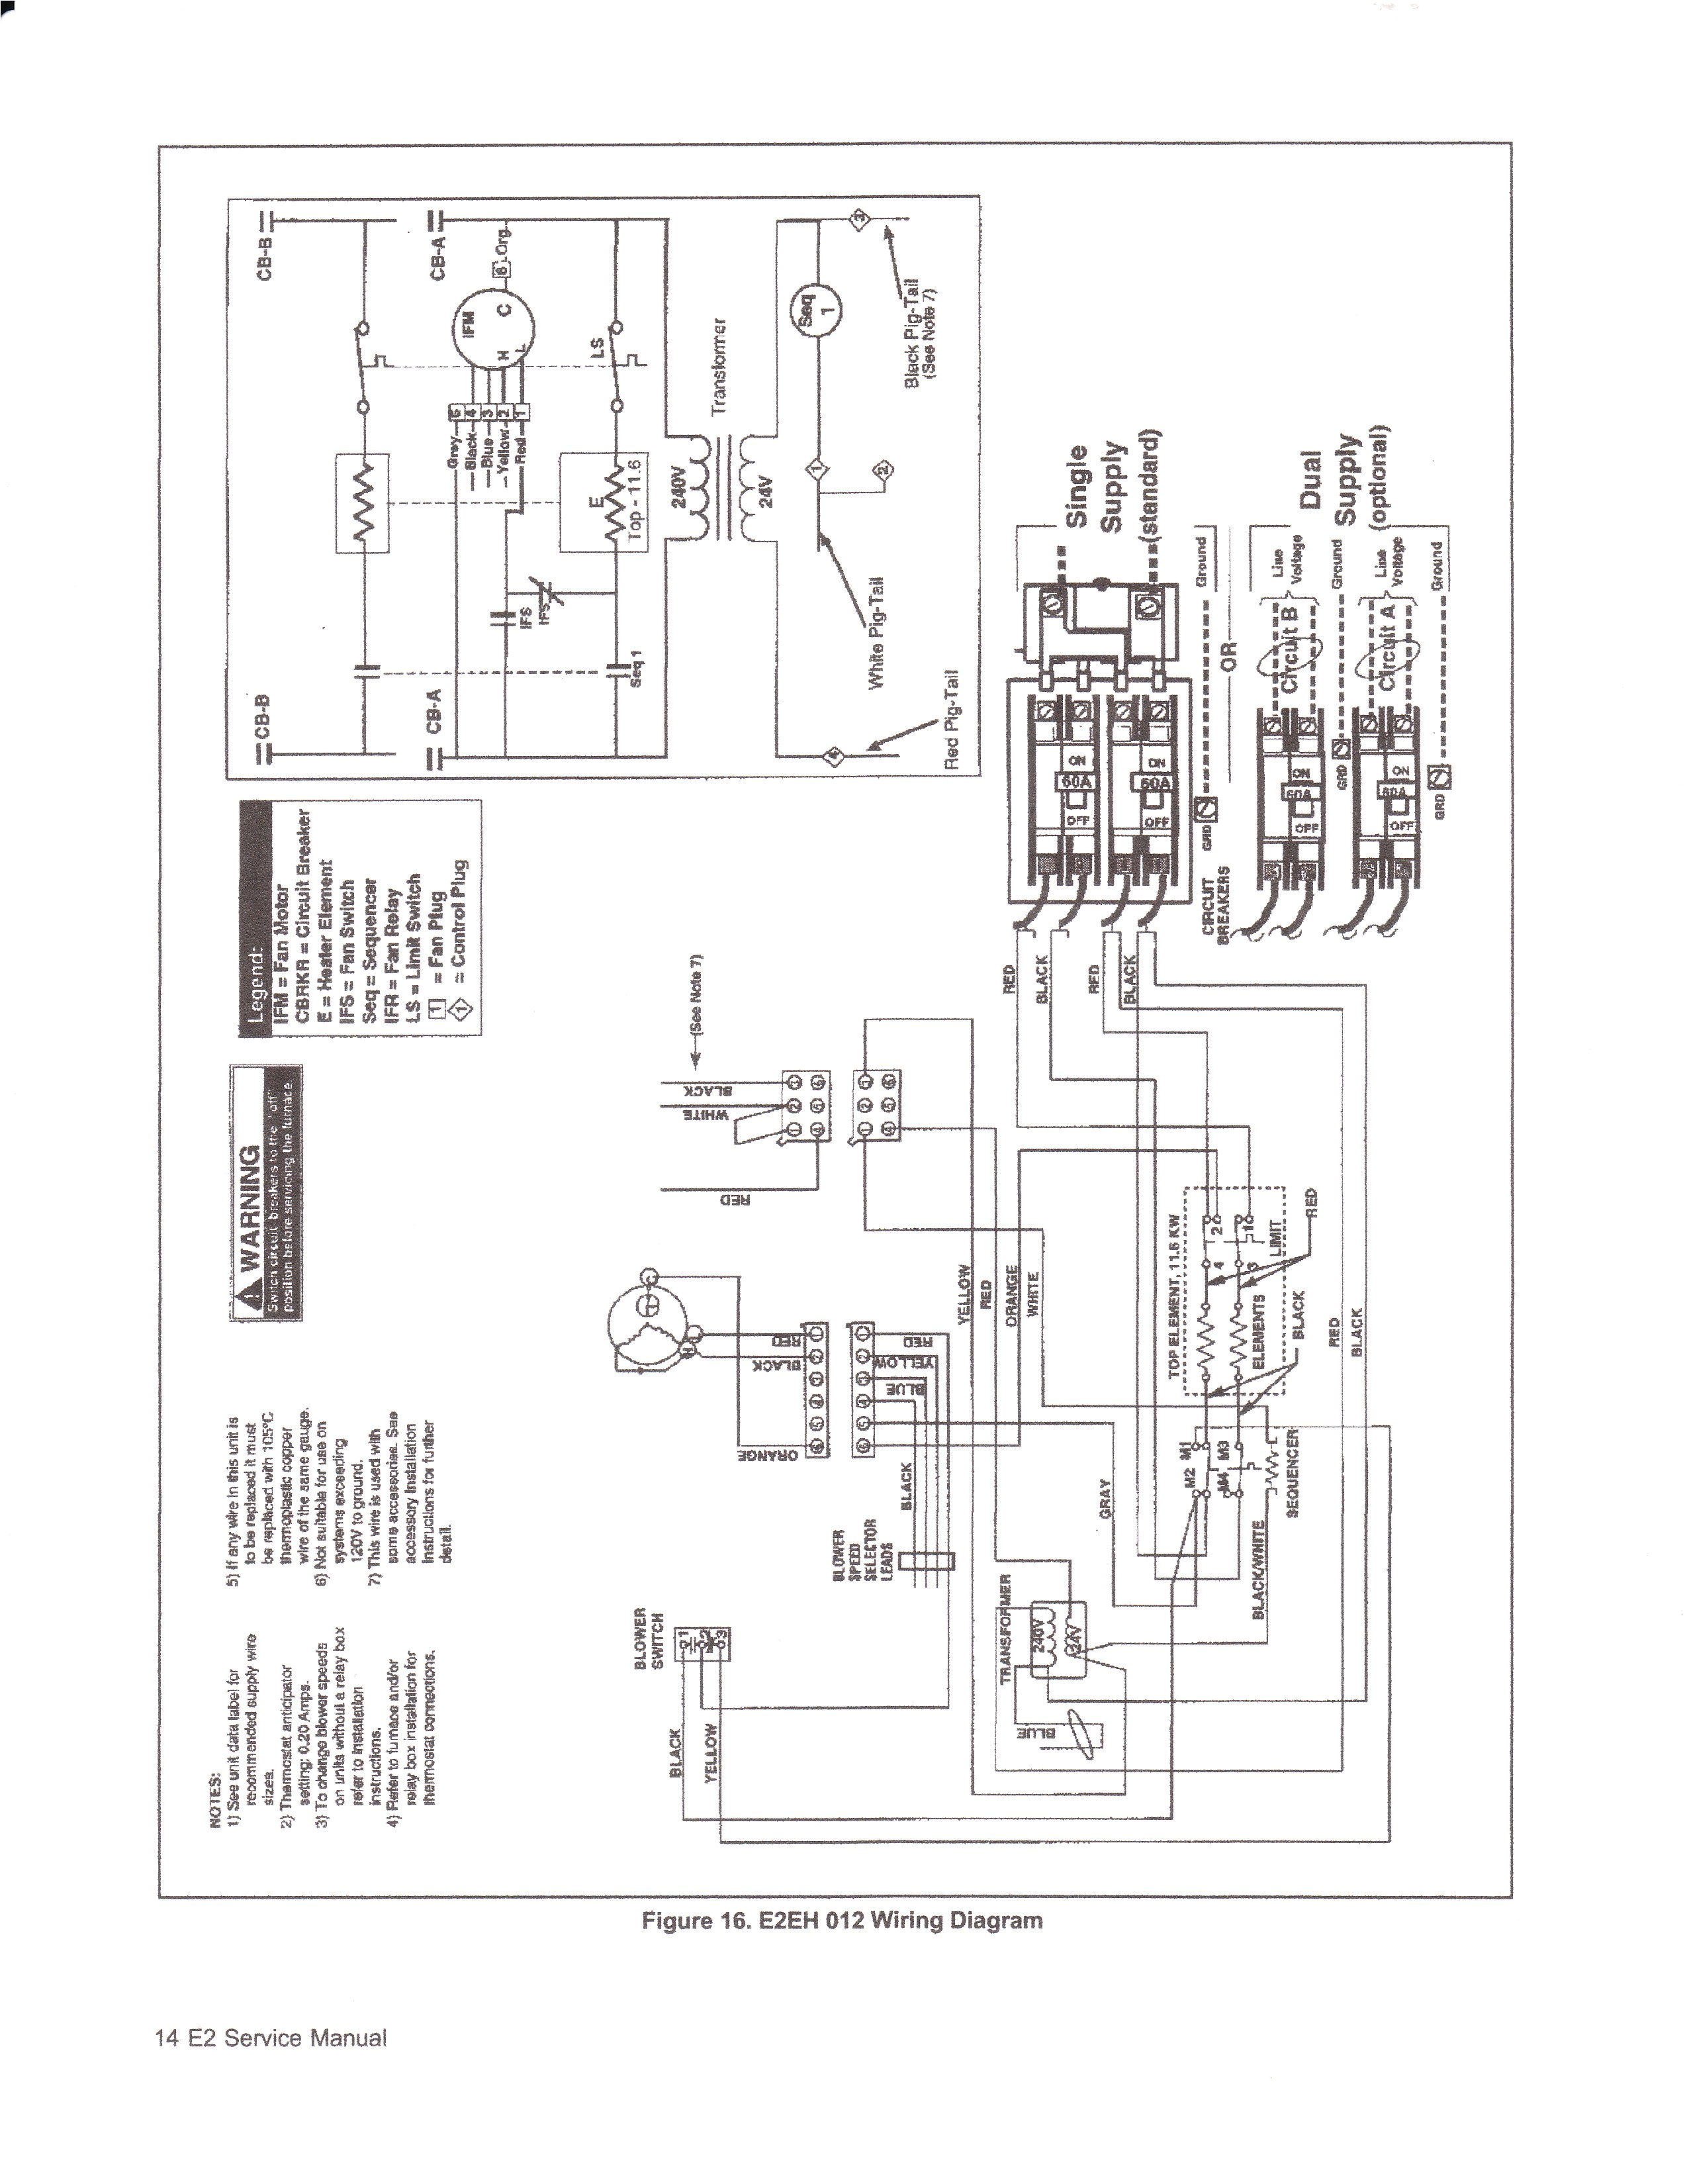 intertherm furnace thermostat wiring wiring diagram mega mobile home thermostat wiring diagram free download